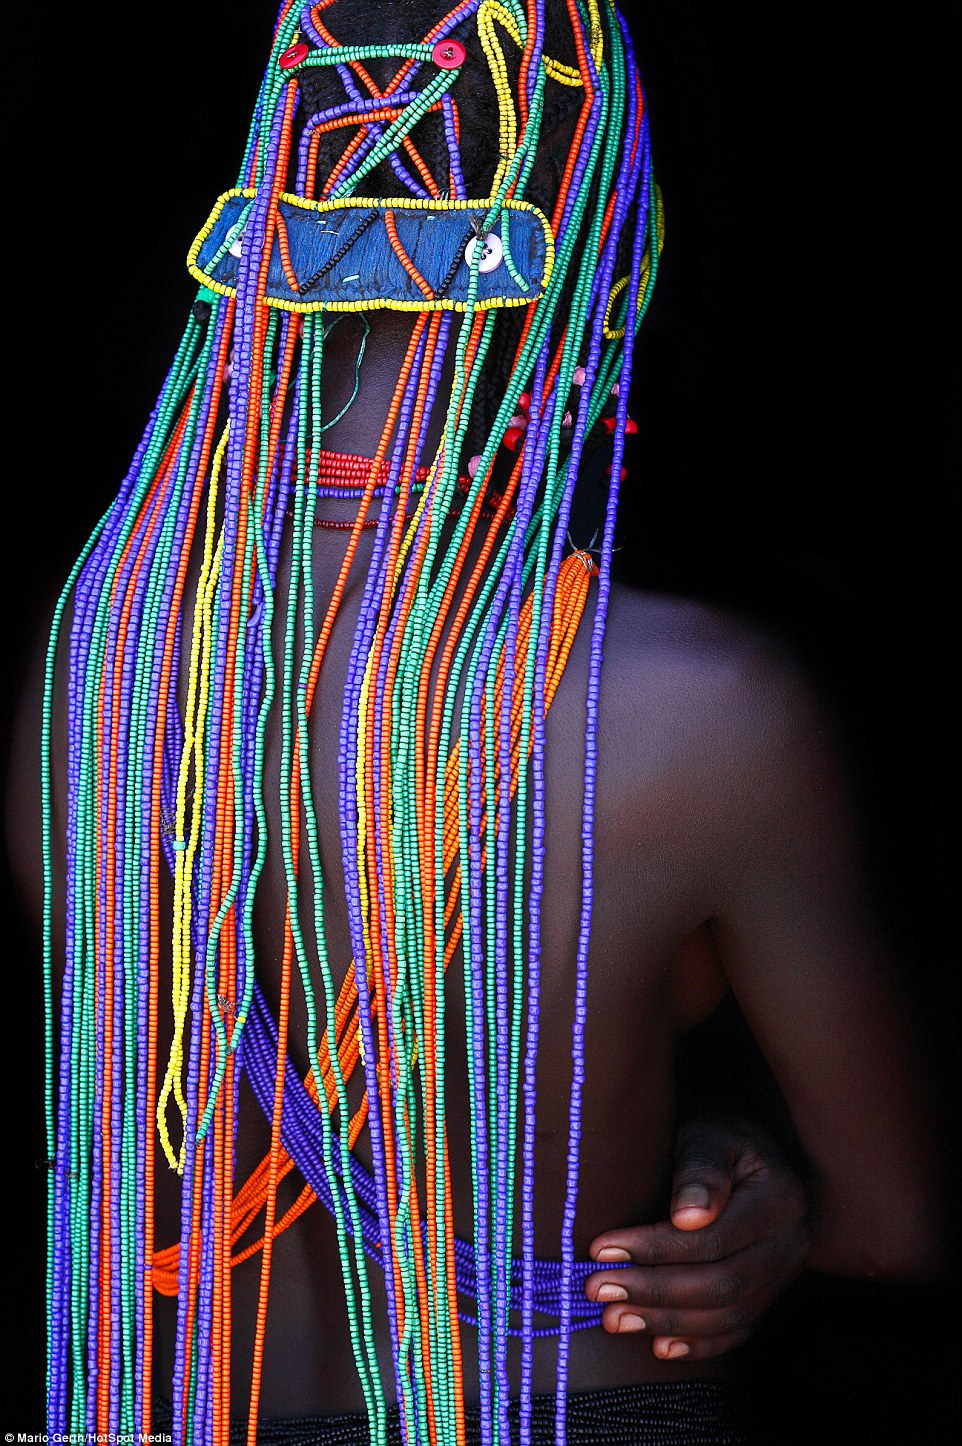 Stunning Hairstyles of African Women Captured by Photographer